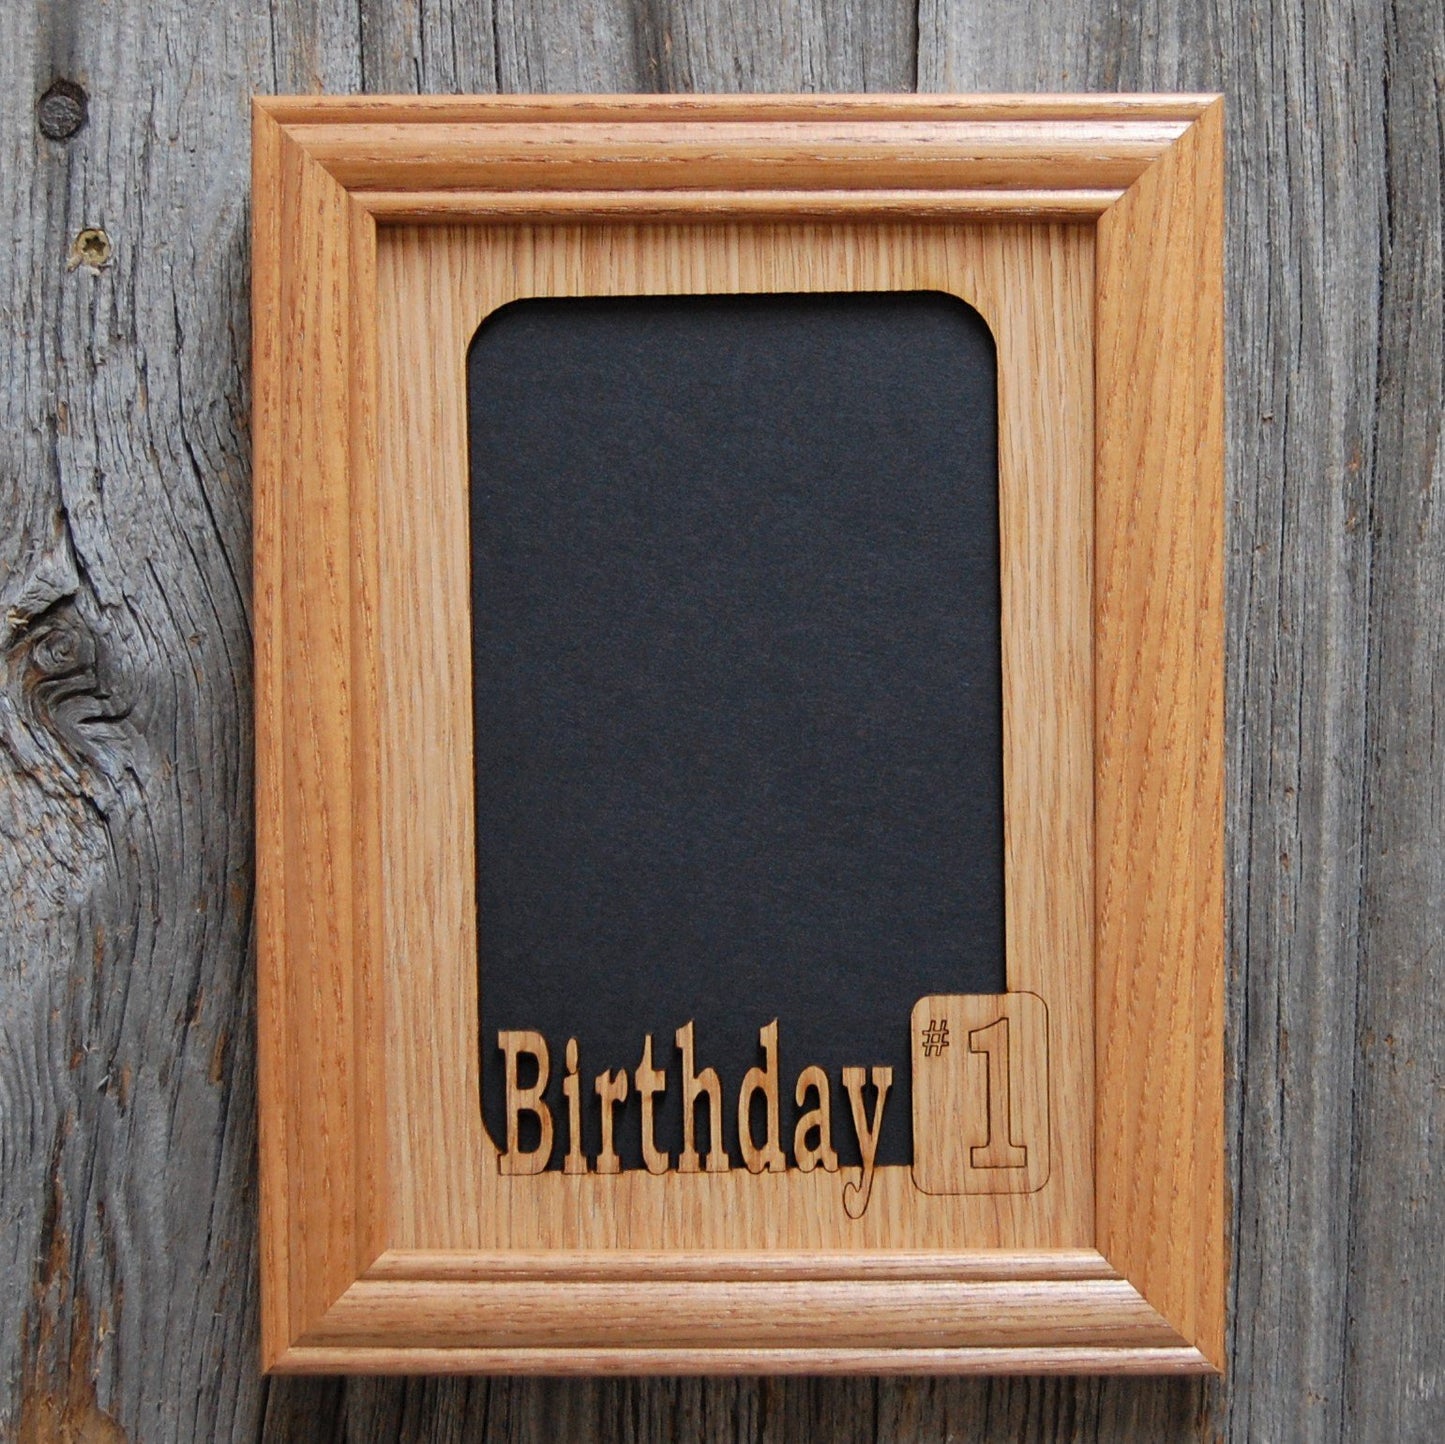 Birthday Picture Frame - 5x7 Frame Holds 4x6 Photo